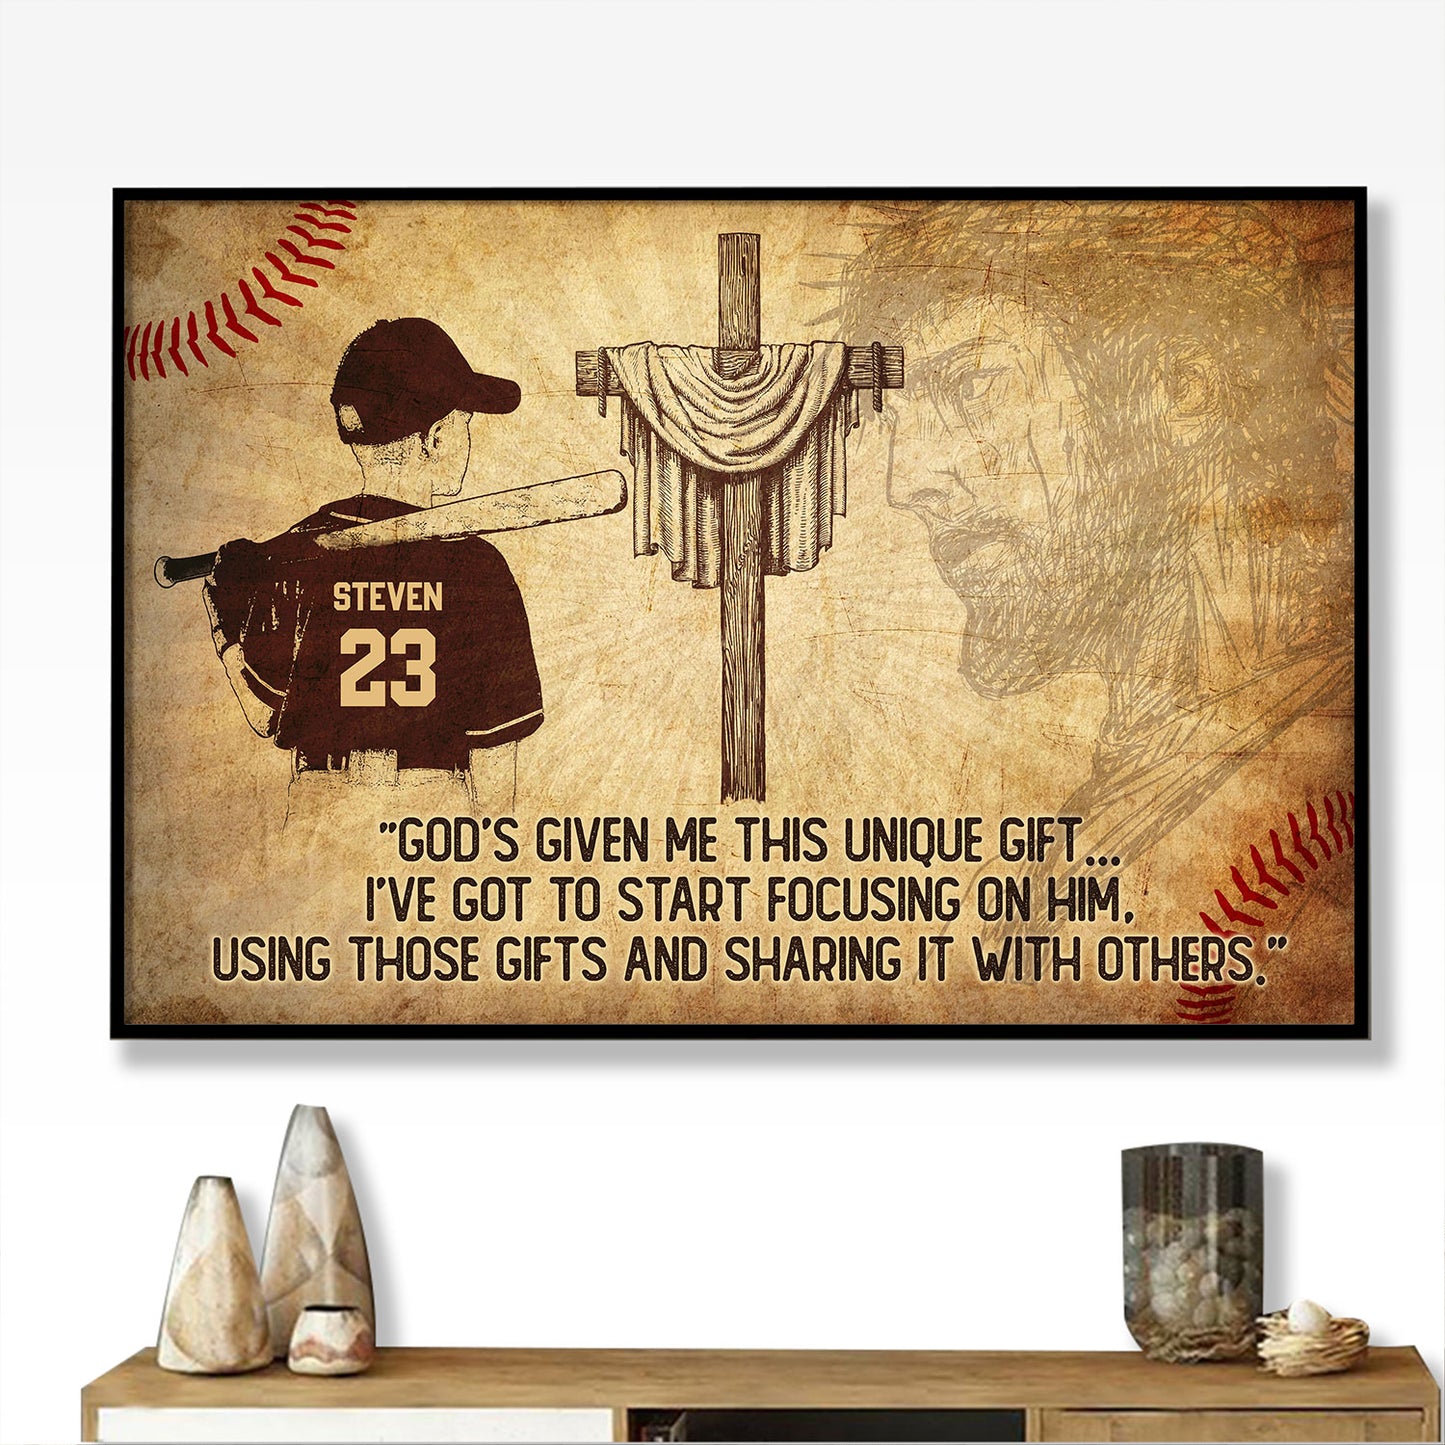 God's Given Me This Unique Gift Baseball Personalized Poster